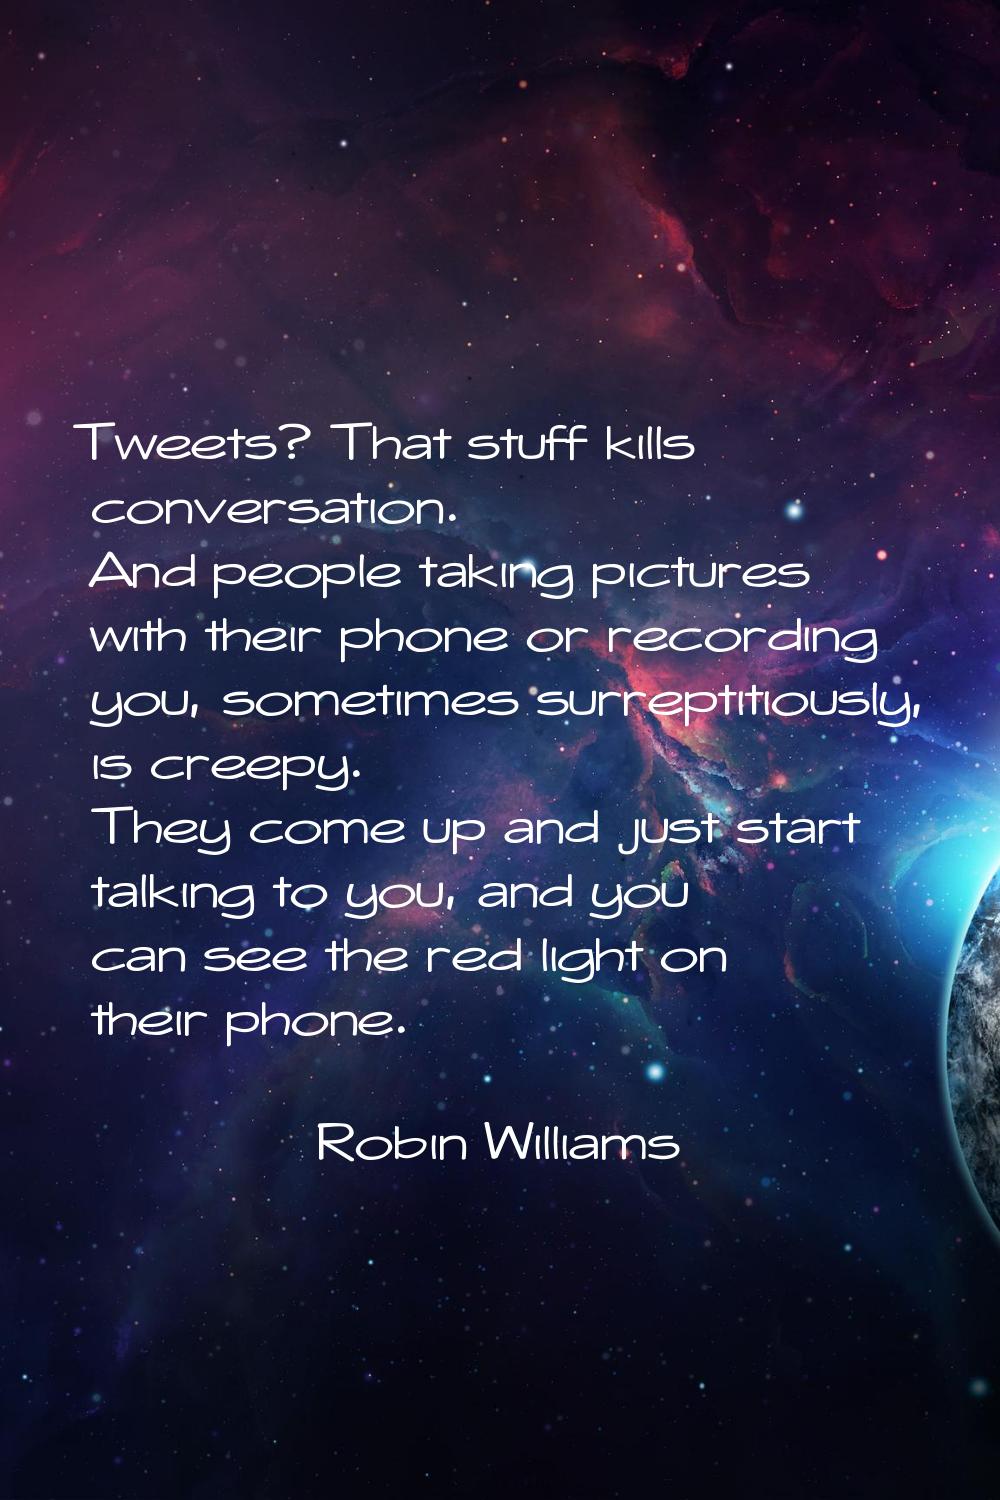 Tweets? That stuff kills conversation. And people taking pictures with their phone or recording you